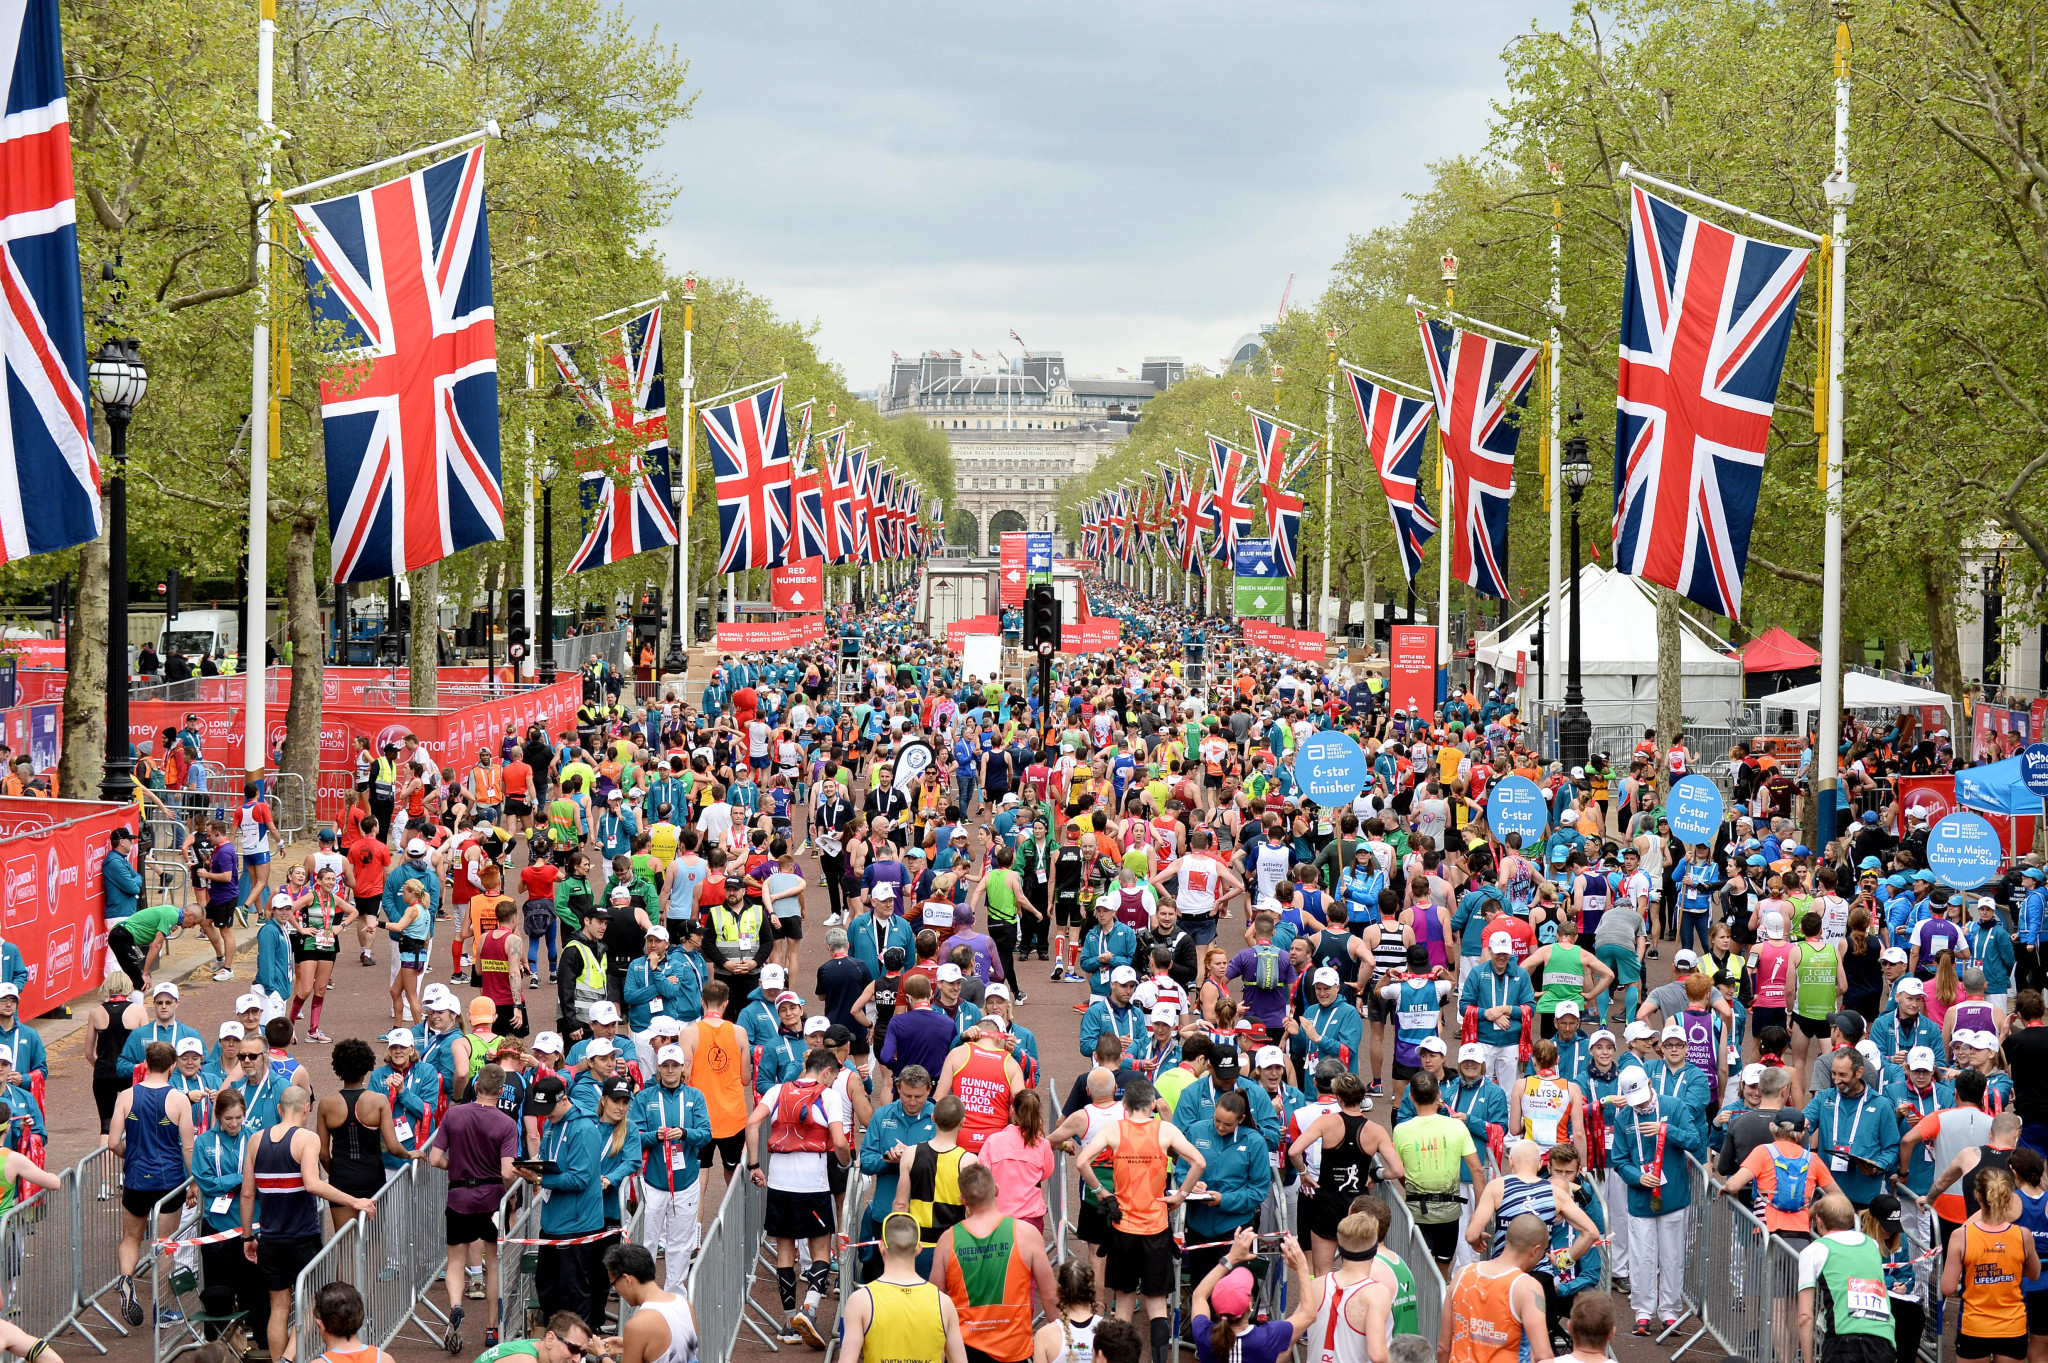 London Marathon director Hugh Brasher has said he "cannot be certain if the event can go ahead" in a letter to those running the 26.2 mile race ©Getty Images